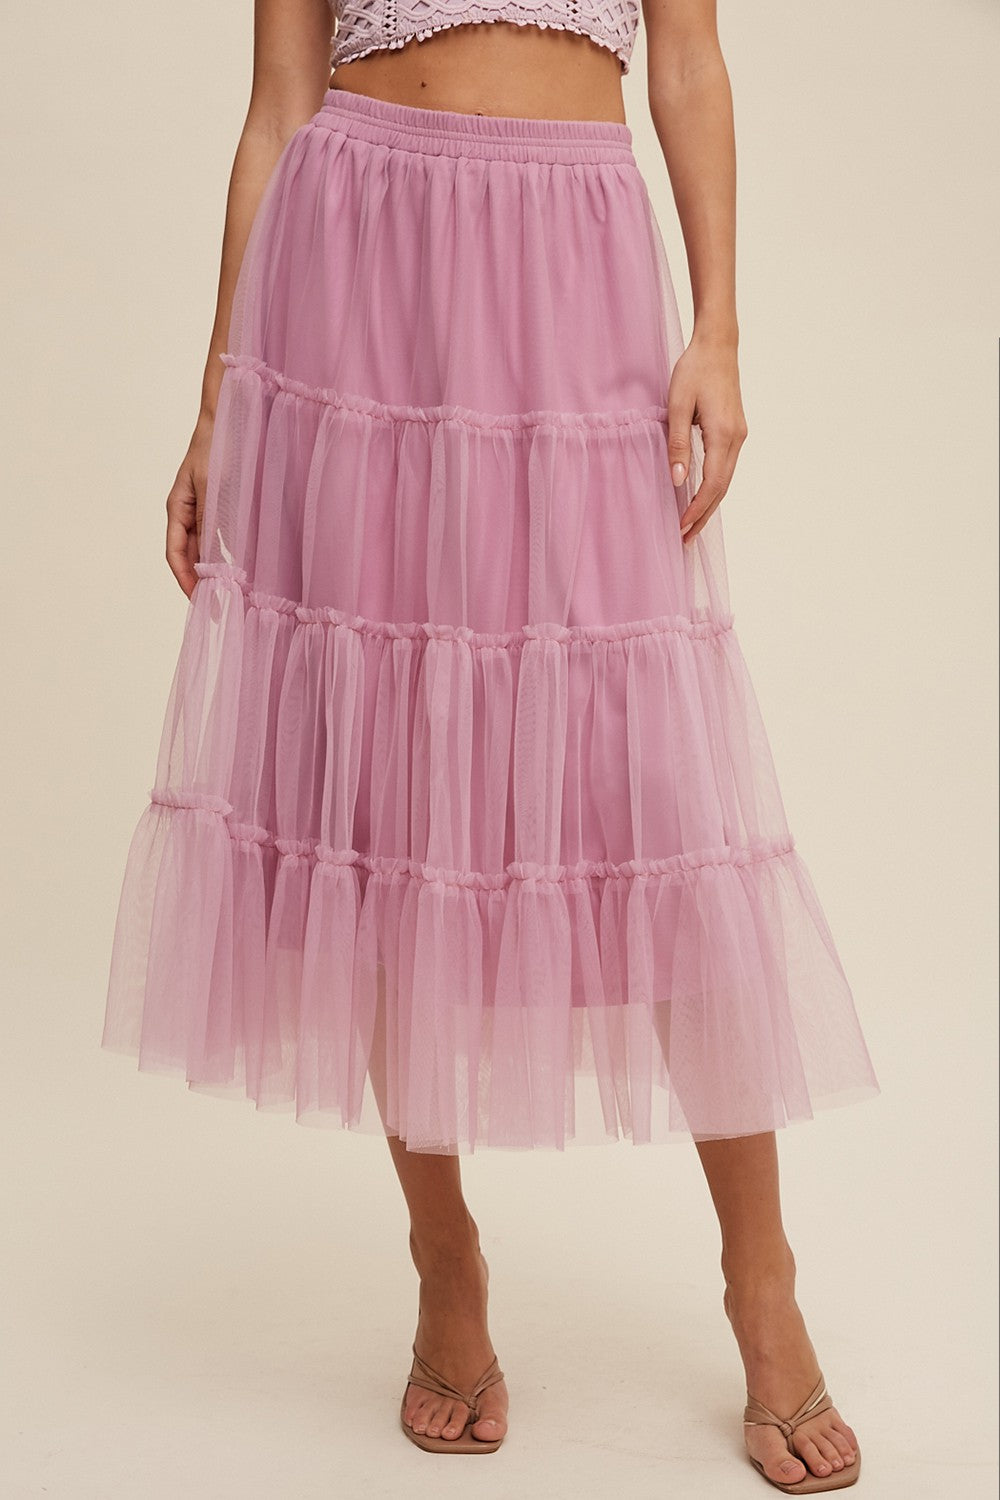 Tiered Tulle Skirt- Mauve